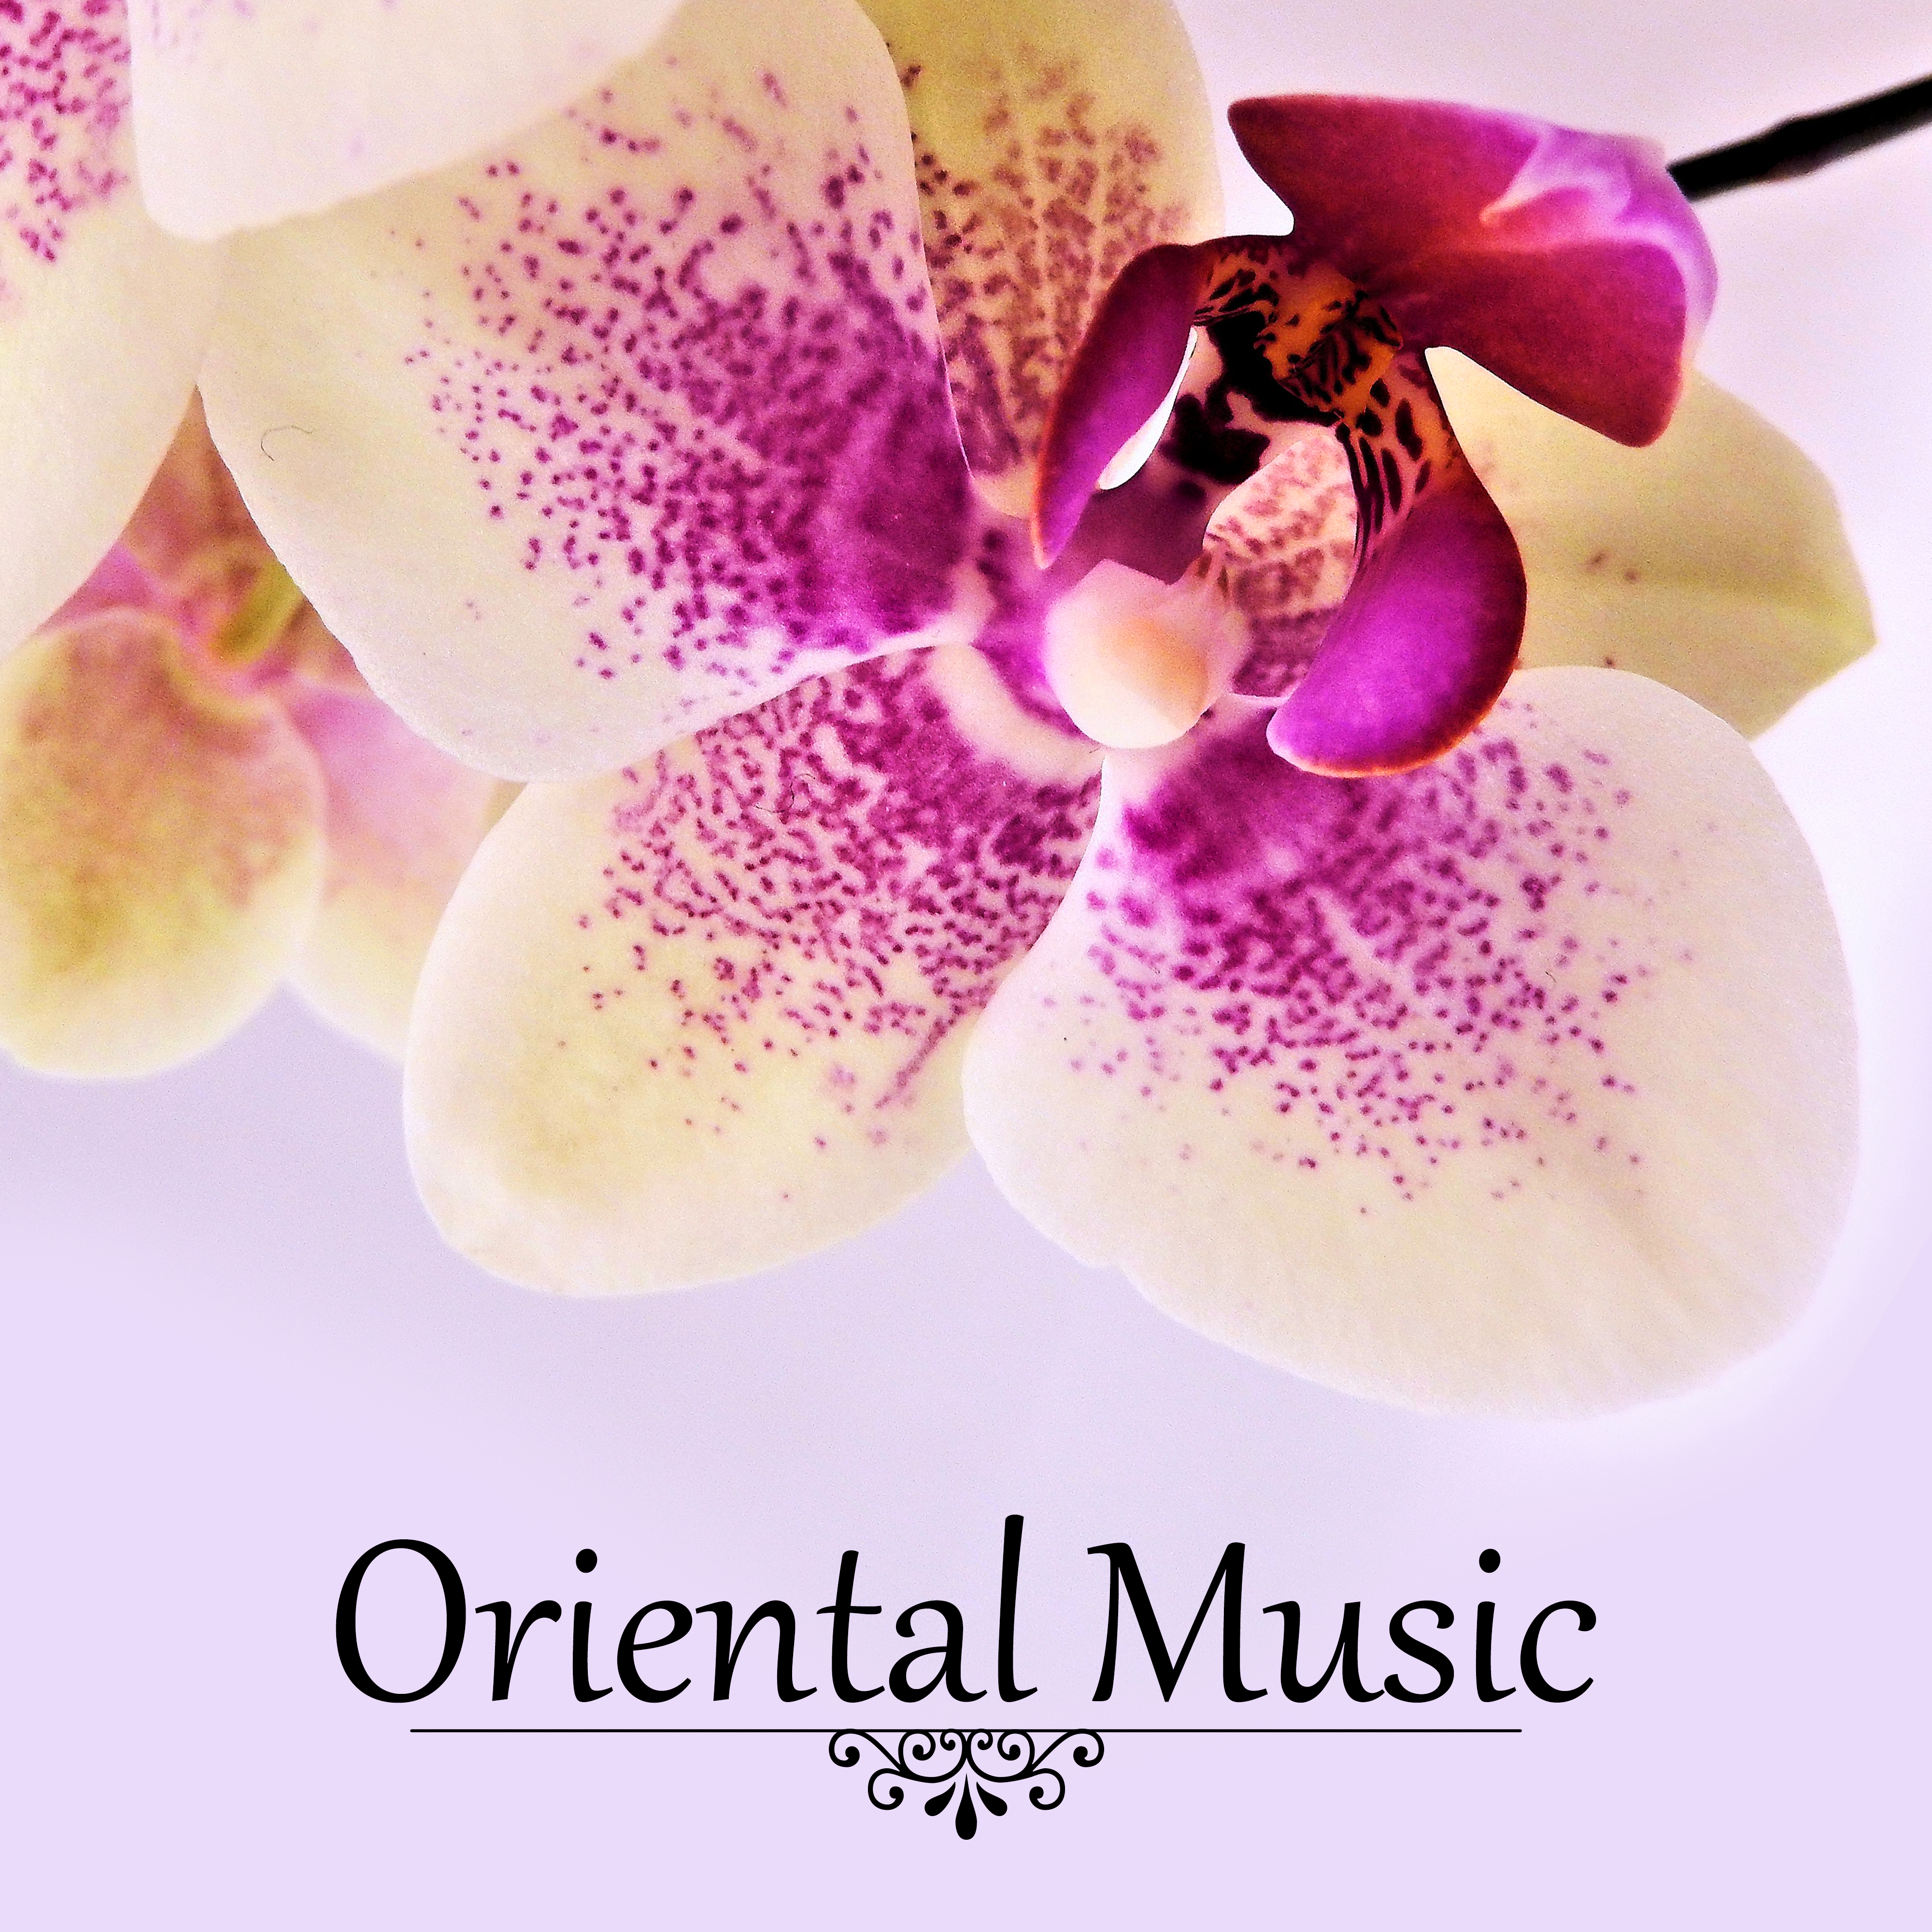 Oriental Music - My Time with Spa Music, Ultimate Spa and Wellness Relaxation